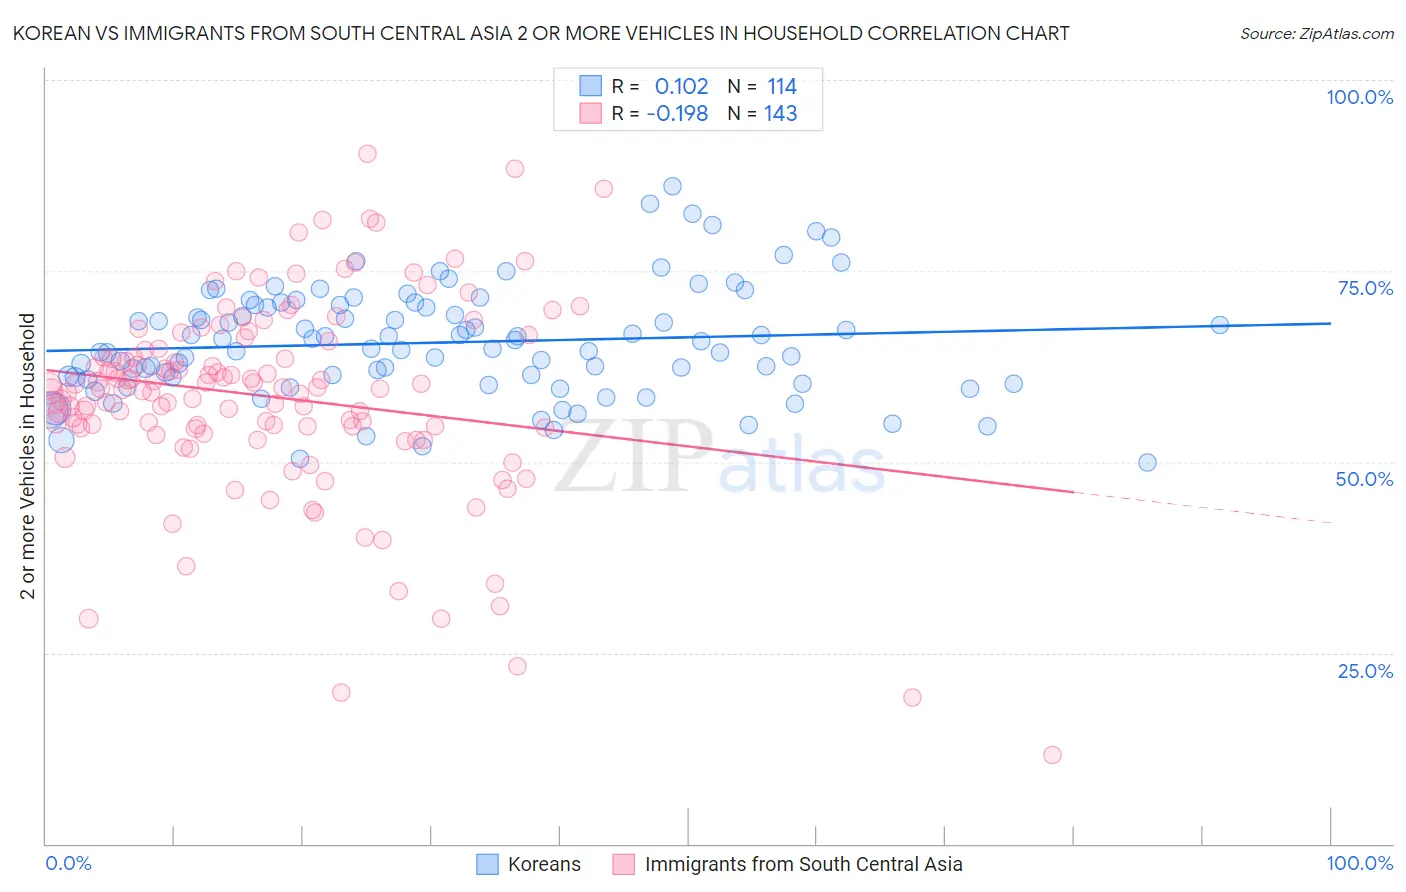 Korean vs Immigrants from South Central Asia 2 or more Vehicles in Household